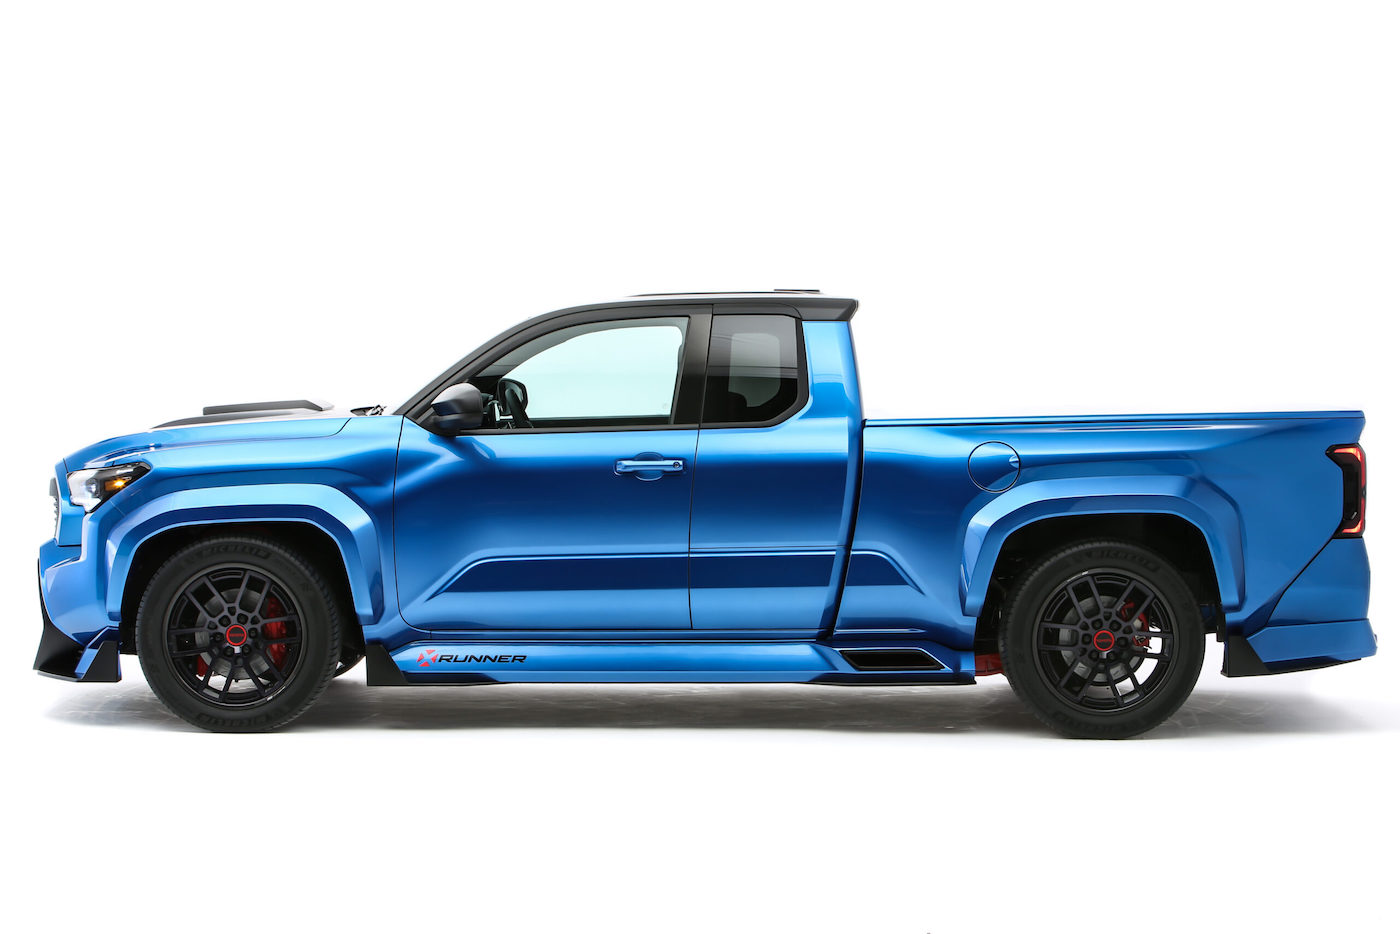 2024 Tacoma 2024 Tacoma X-Runner Concept Envisions Sport Truck with TRD Performance Package Upgrades Tacoma_X_Runner_Concept_Toyota_SEMA_2023_Hi-Res_2-scaled